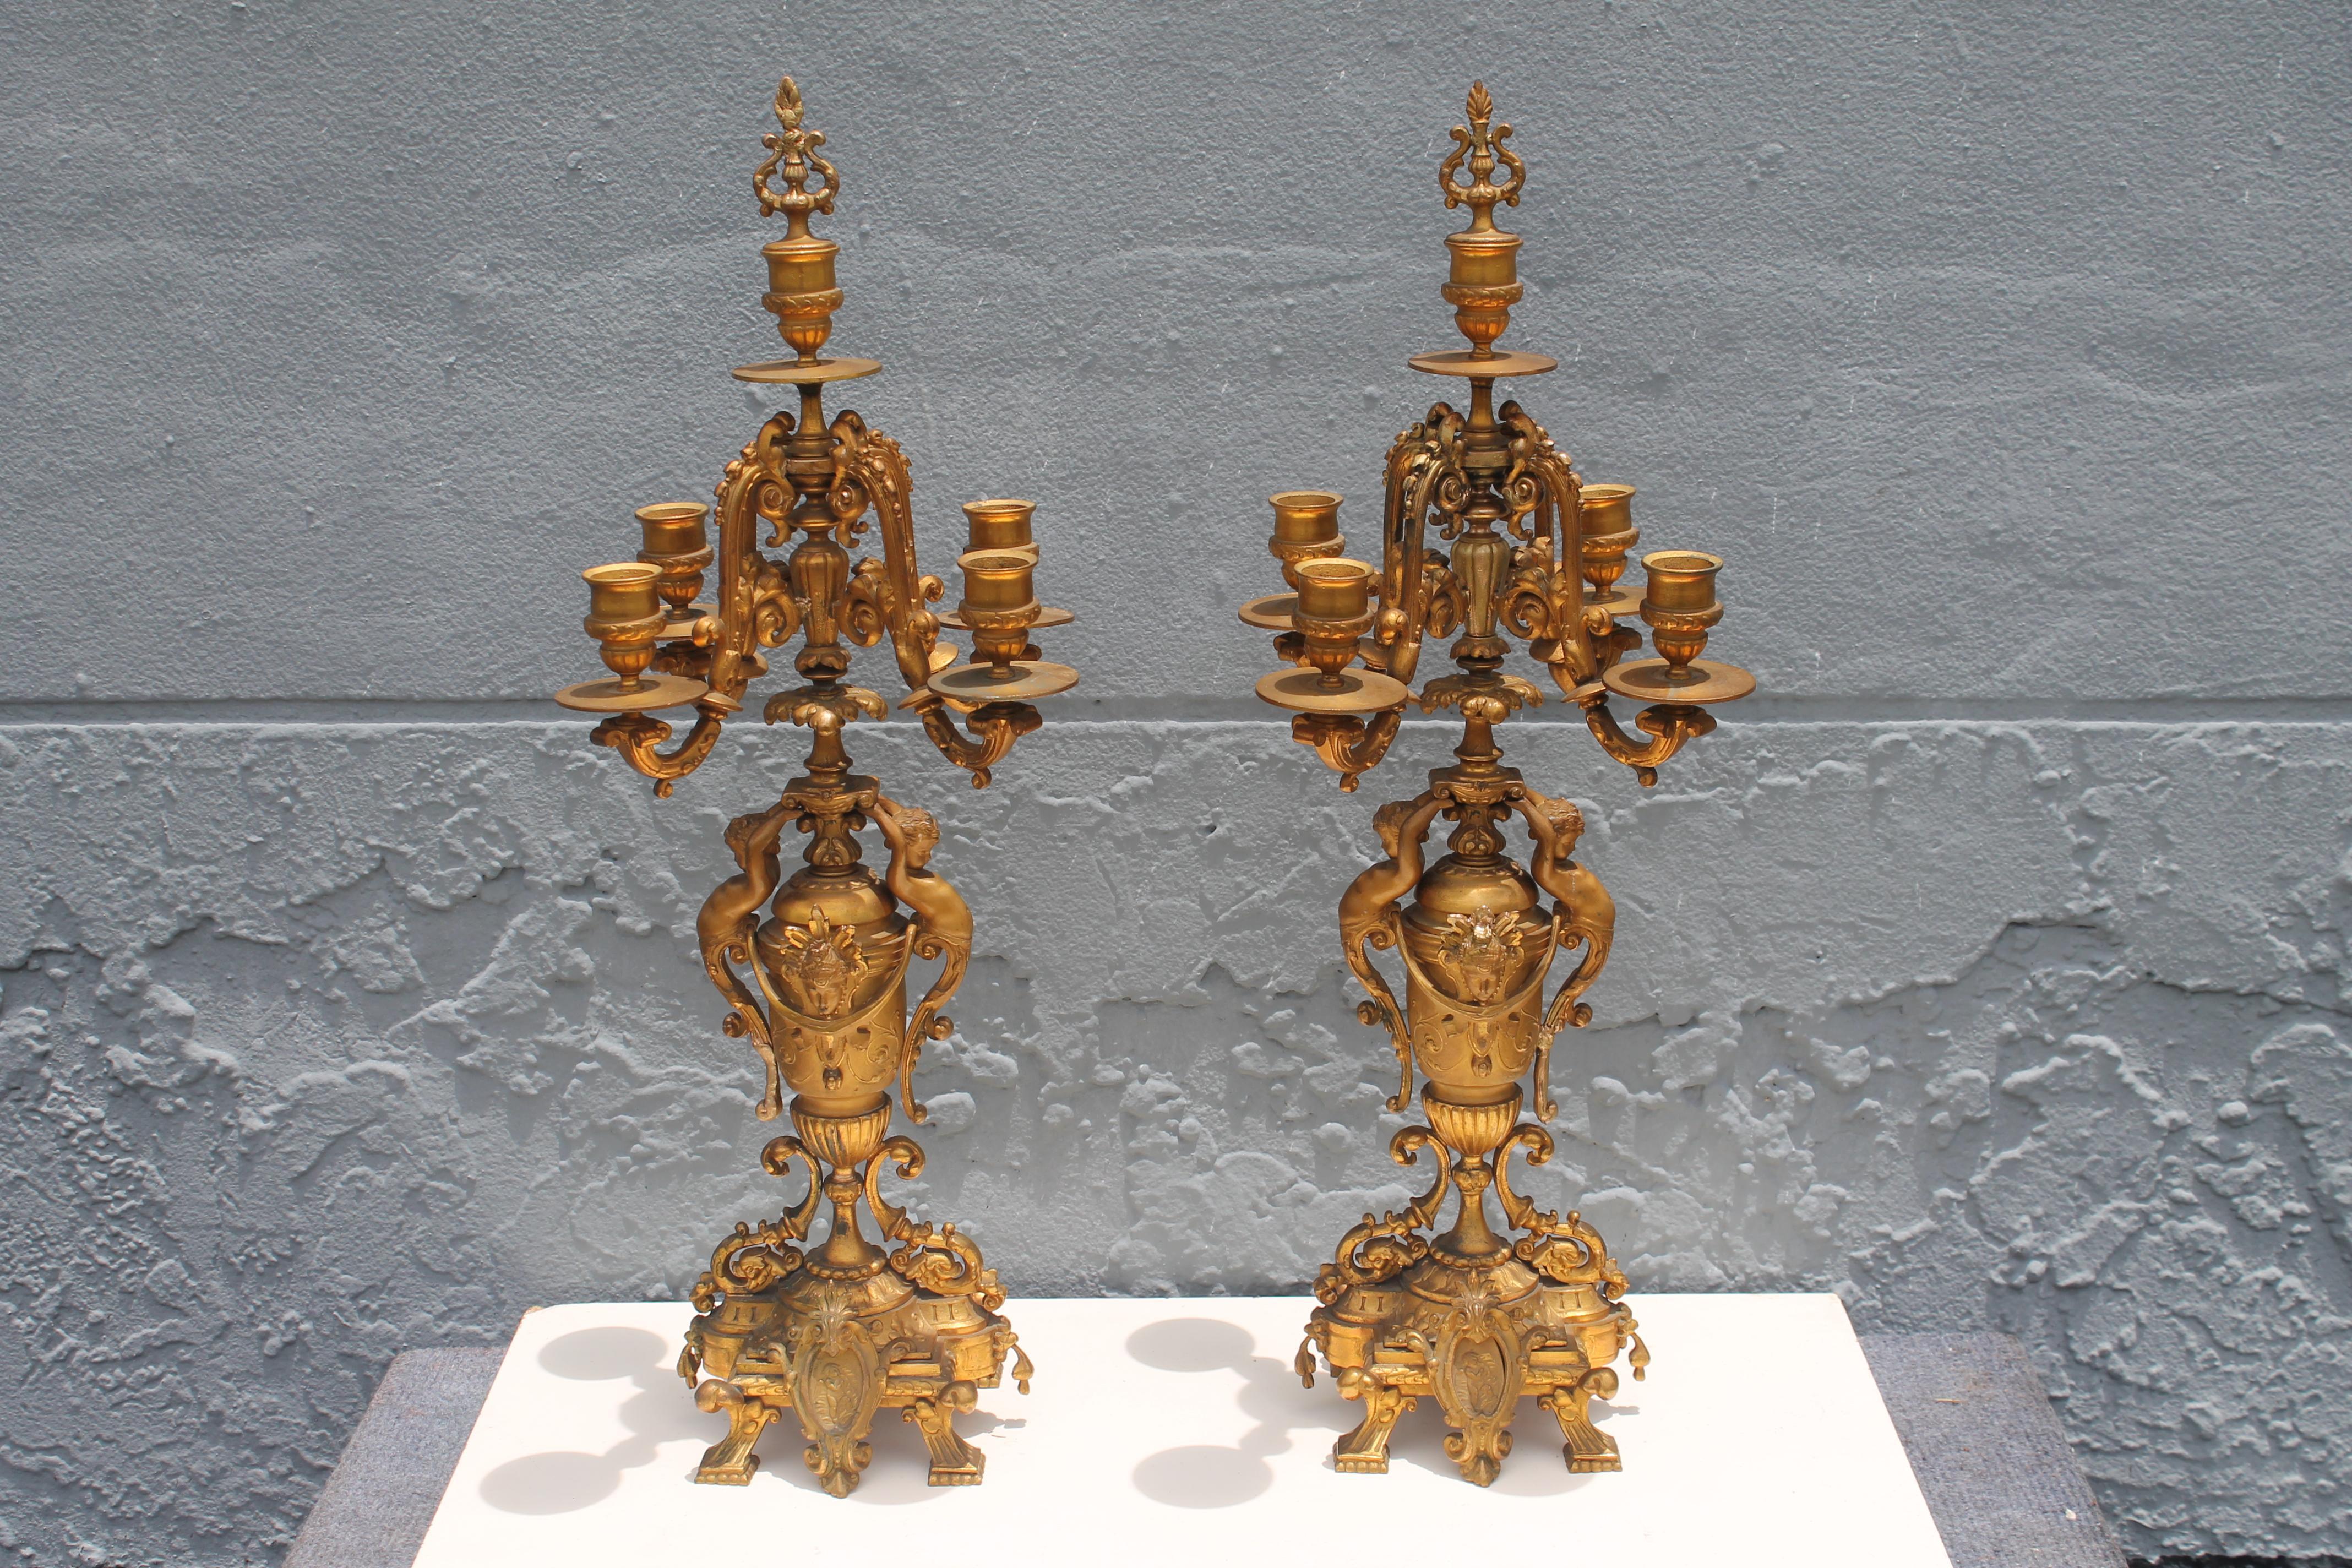 Pair 19thc Grand Louis XVI style Gilt Spelter Seraphim Cherub Candelabras. Very highly detailed and beautiful. These candelabras command presence as they are stunning and large. 